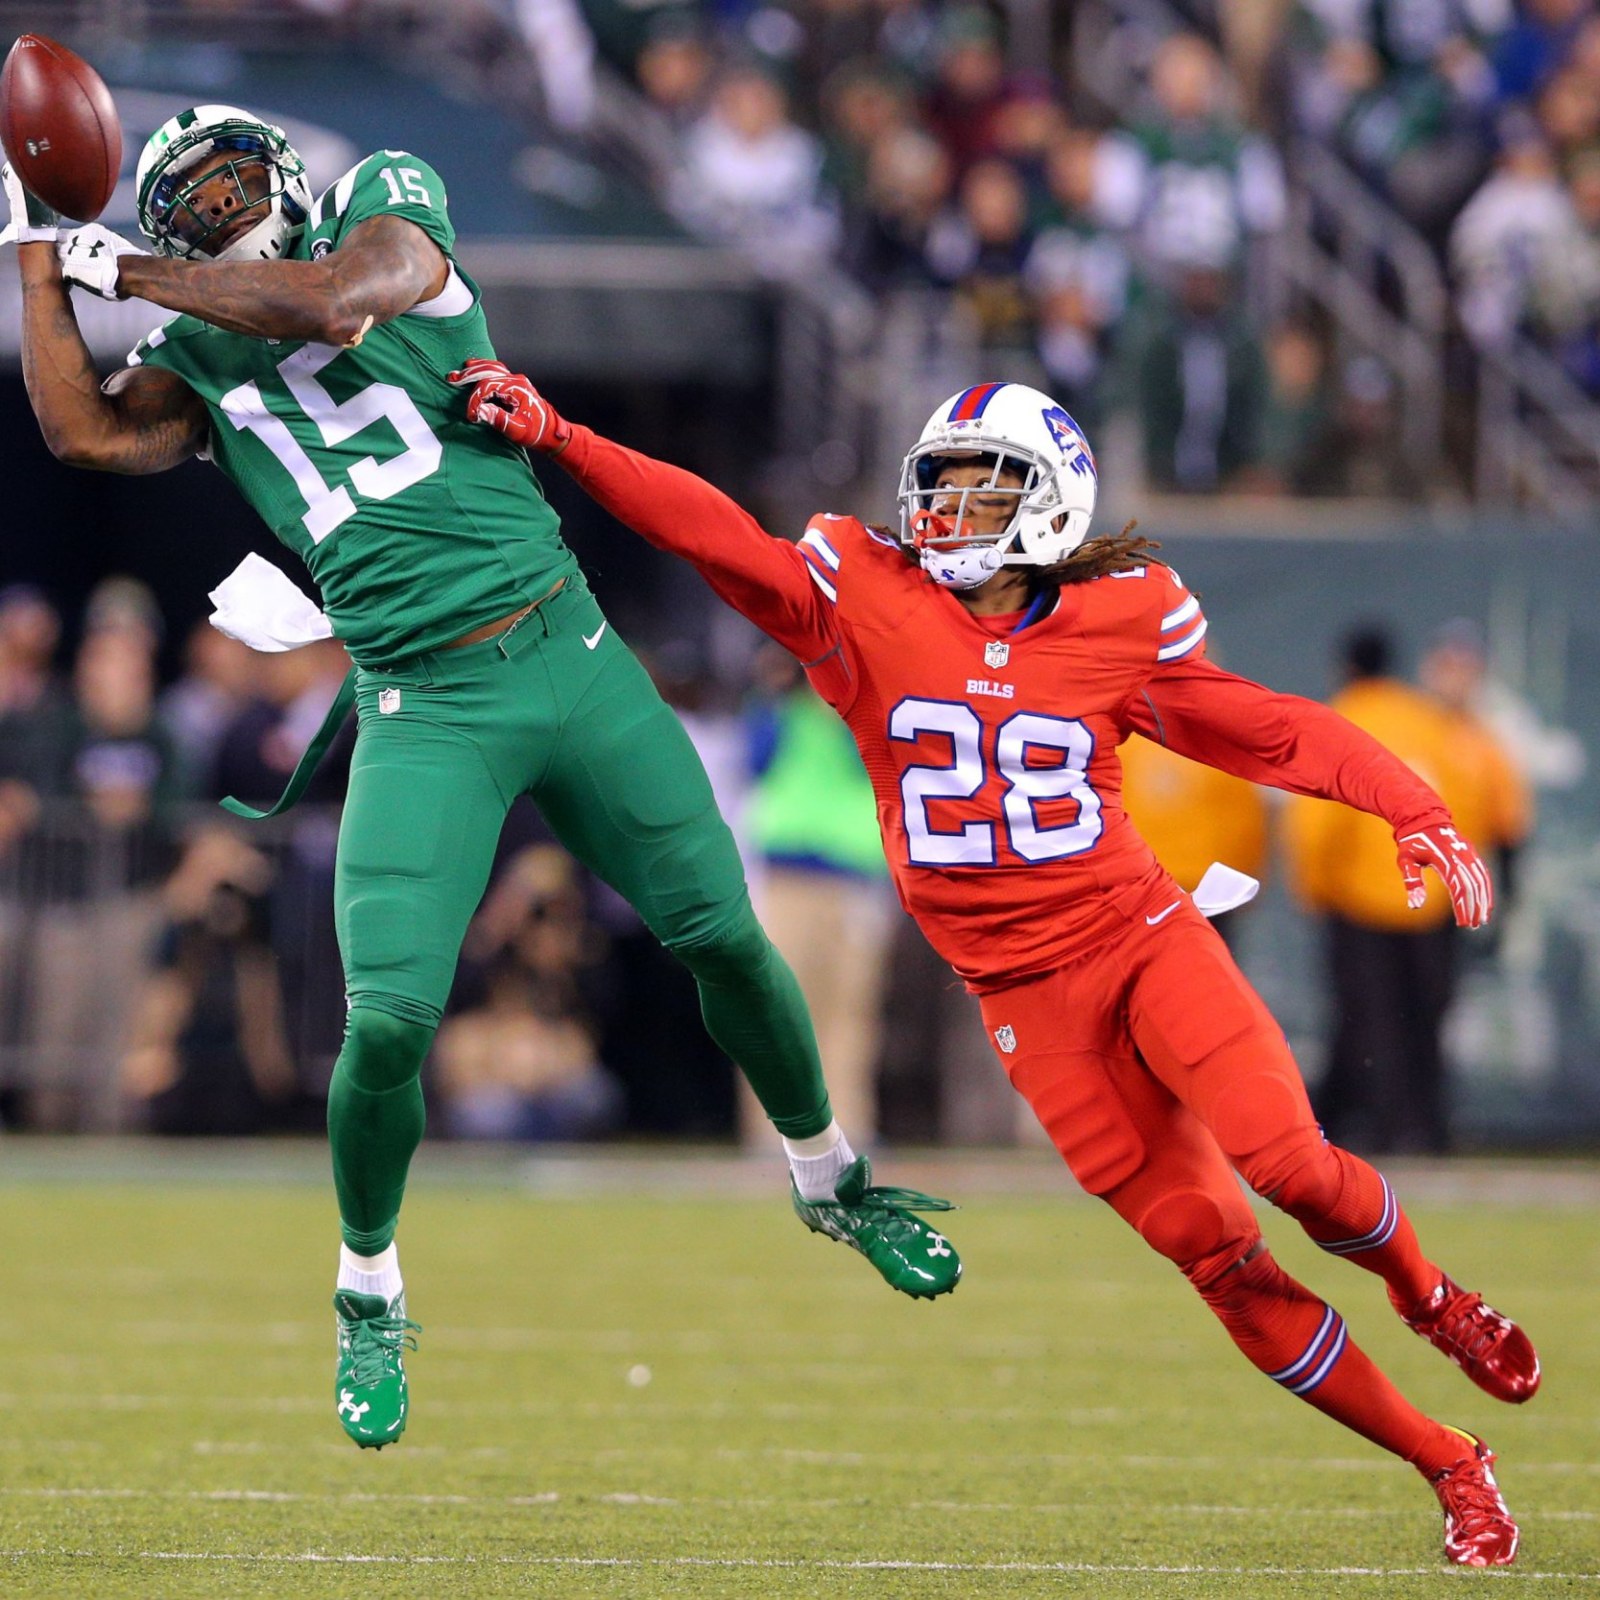 Jets alter 'Color Rush' uniforms to accommodate color-blind fans